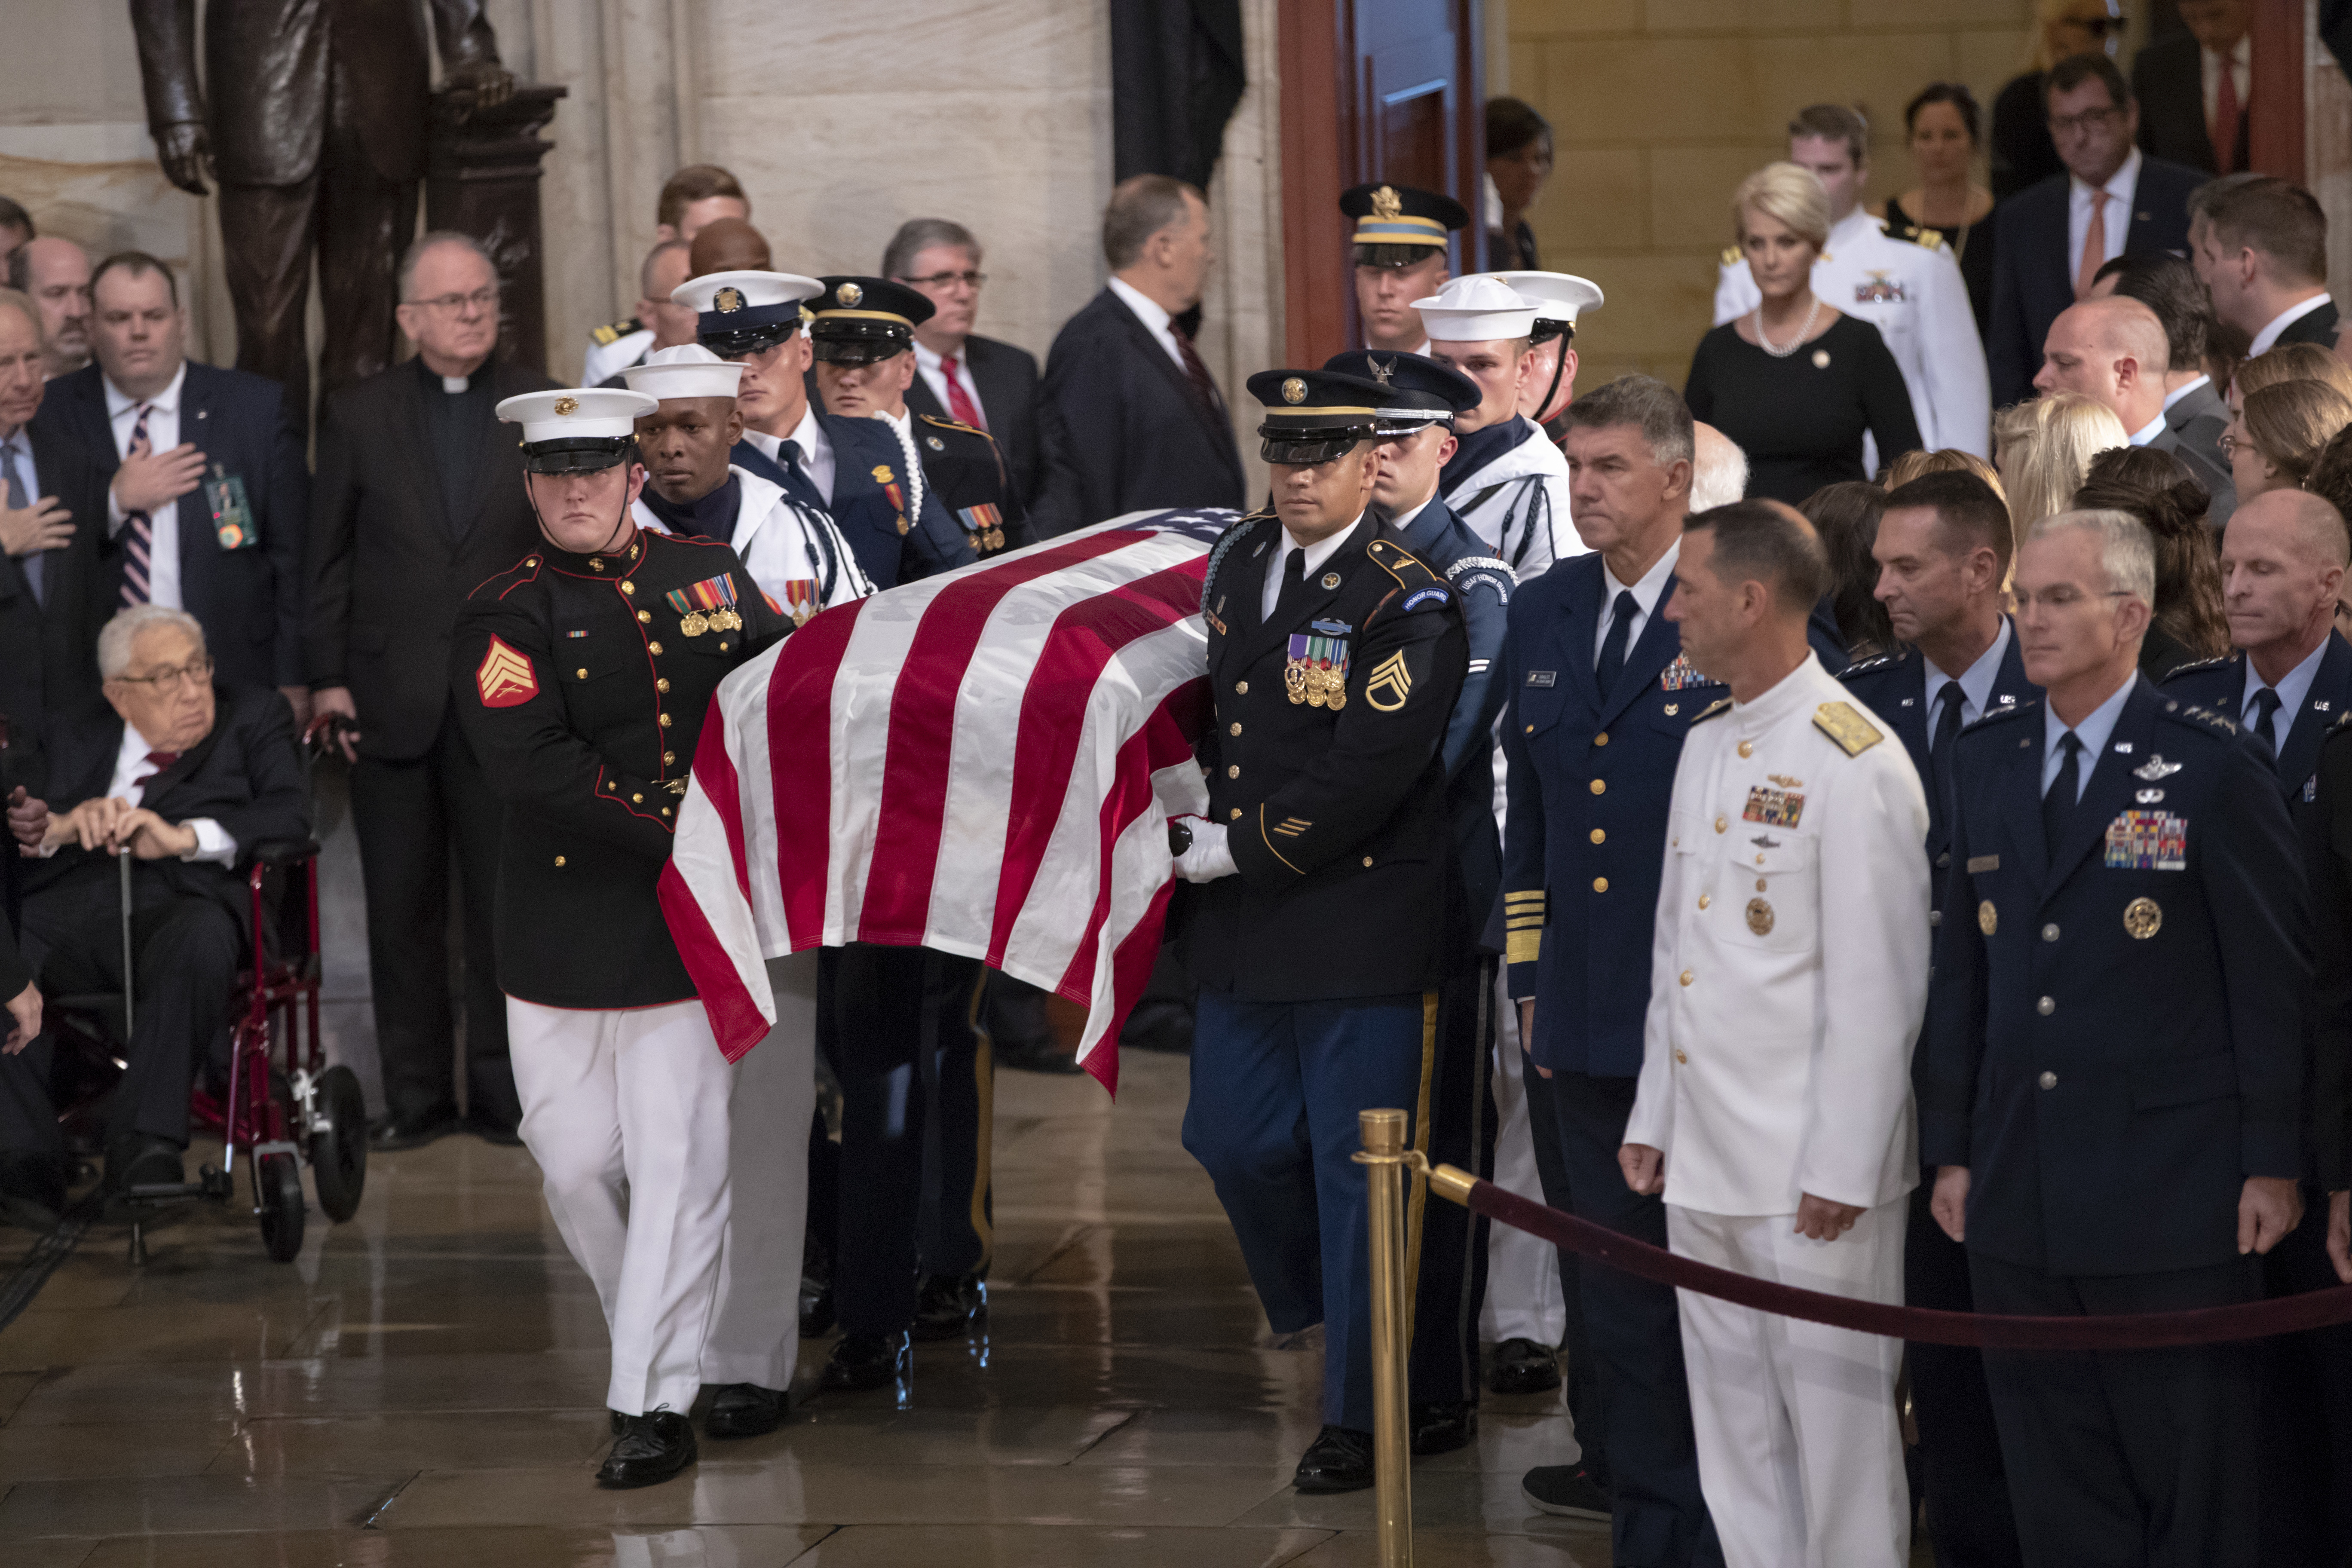 The flag-draped casket bearing the remains of Sen. John McCain of Arizona is carried into the Capitol Rotunda, followed by his widow, Cindy McCain, upper right, for a farewell ceremony and public visitation on Aug. 31, 2018 in Washington. 